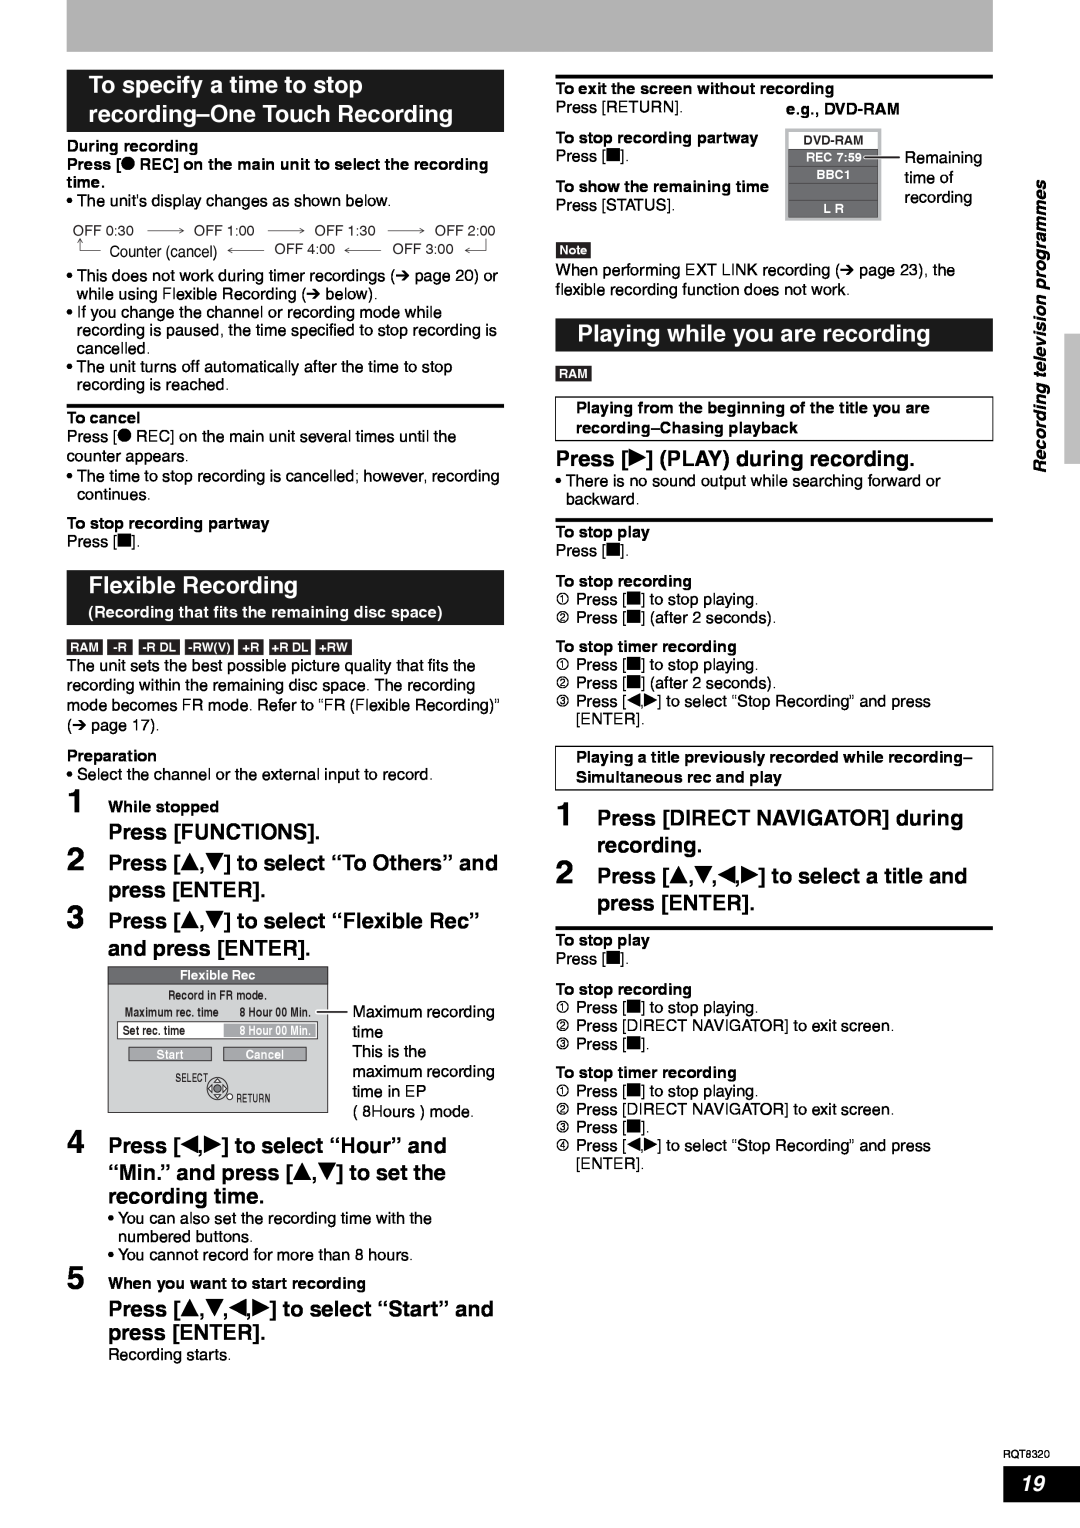 Panasonic DMR-ES15EB manual To specify a time to stop recording-One Touch Recording, Flexible Recording 